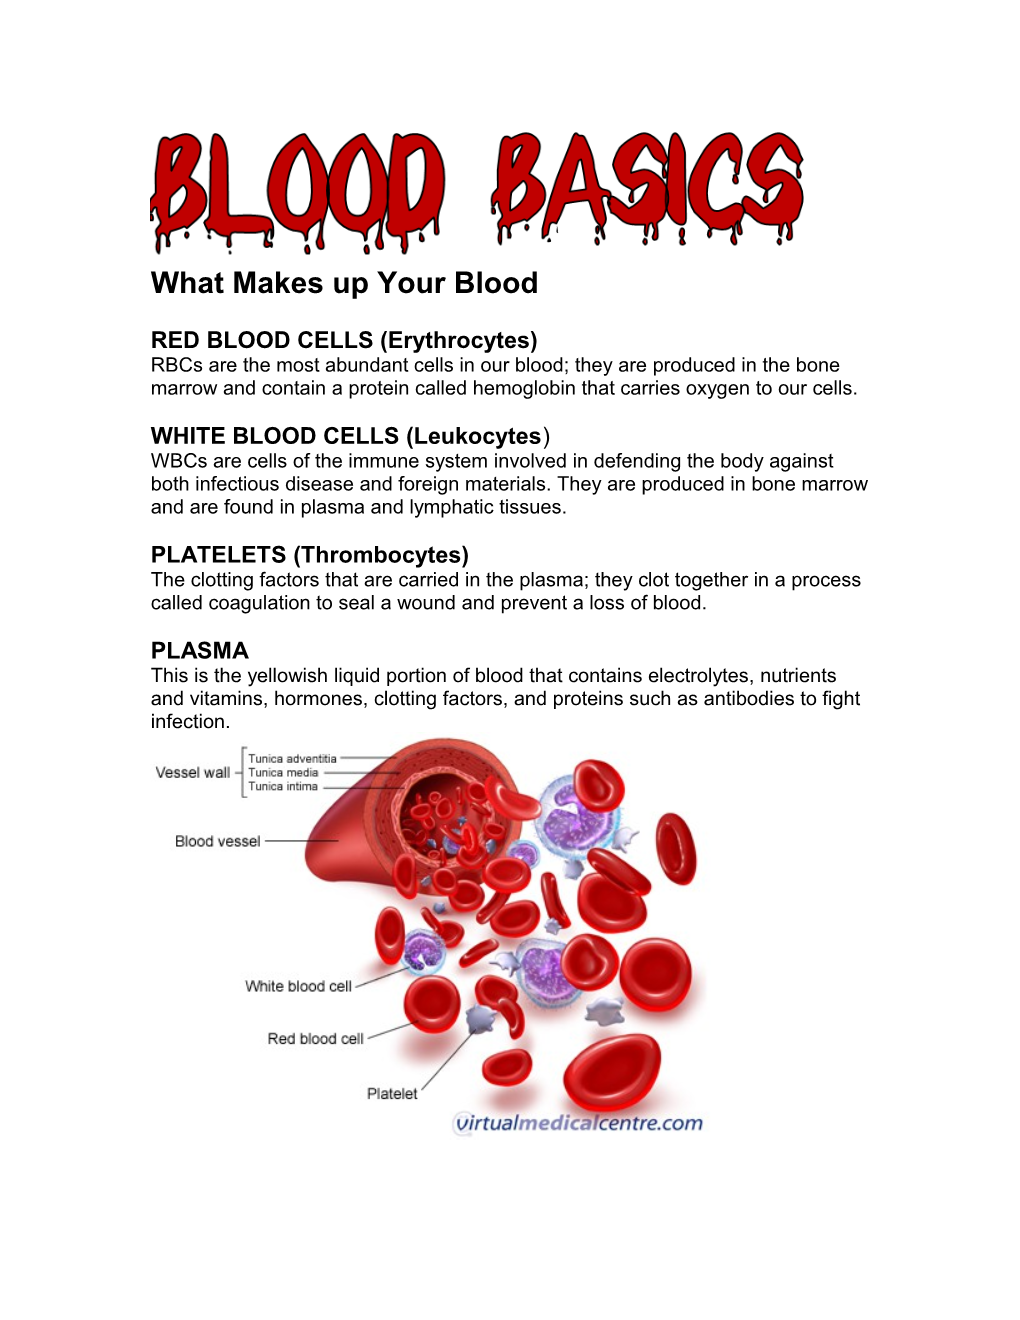 What Makes up Your Blood